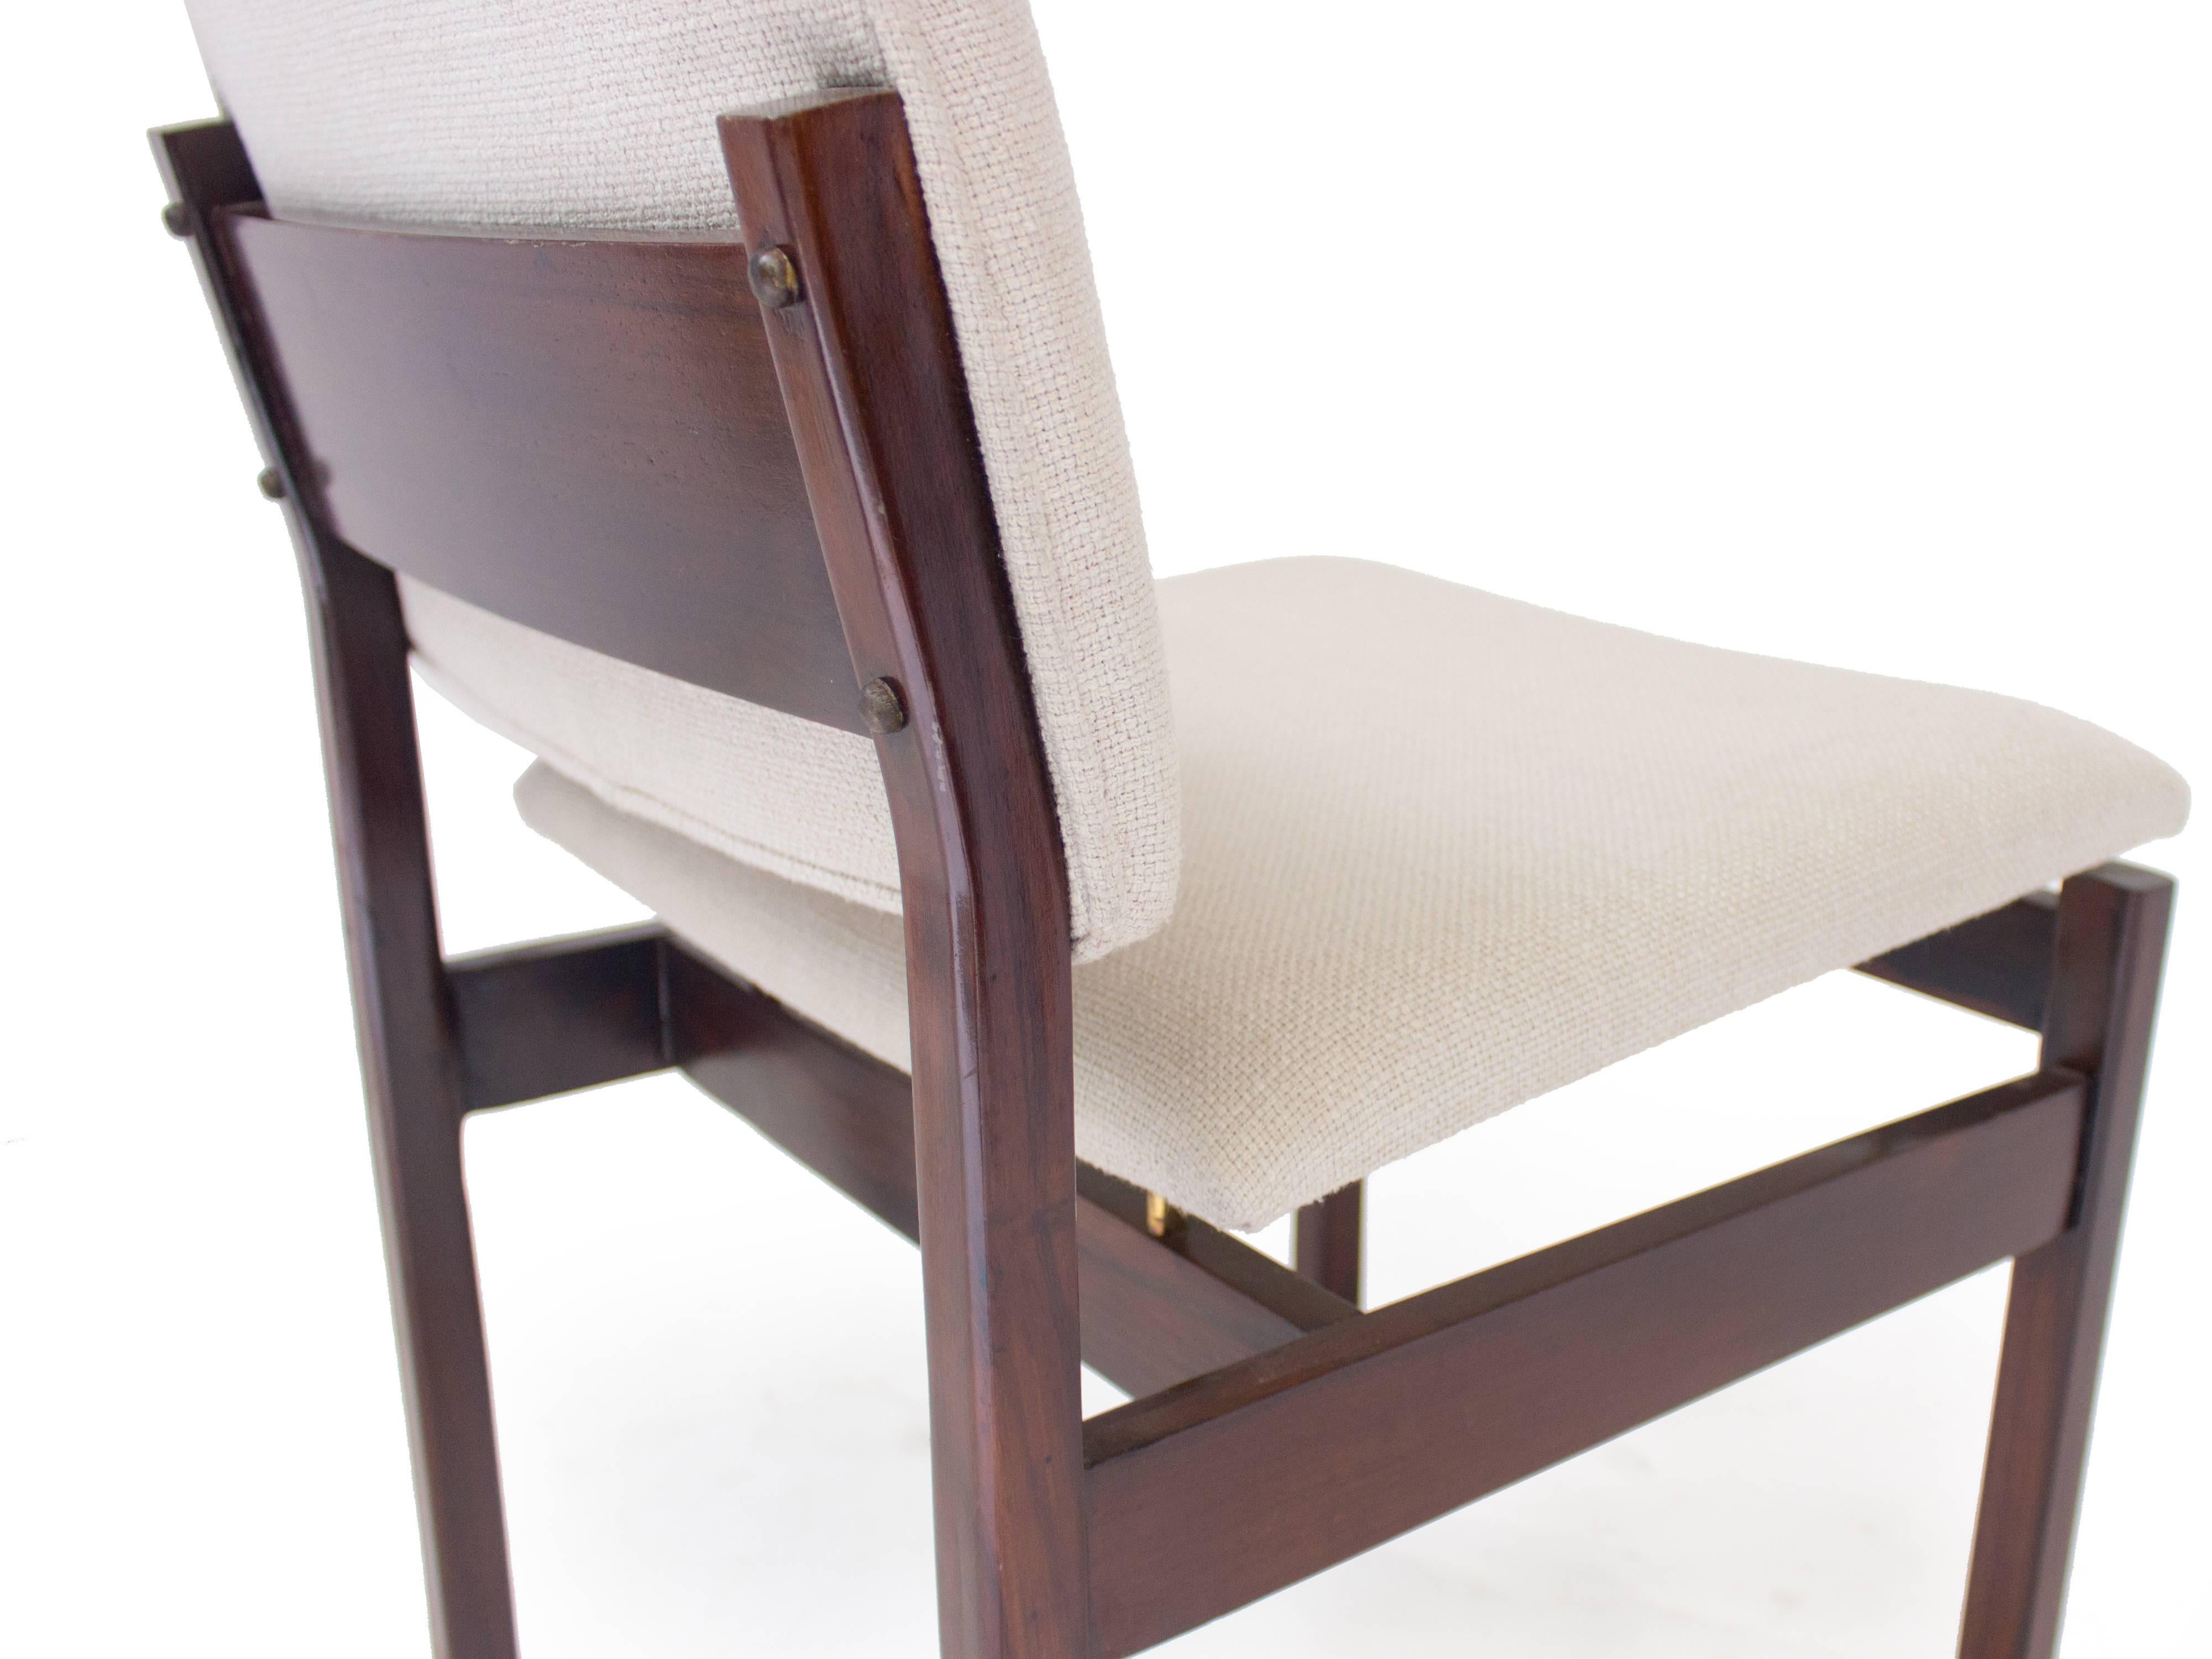 19th Century Arredamento Midcentury brazilian Chair in Rosewood with Linen Upholstery, 60s